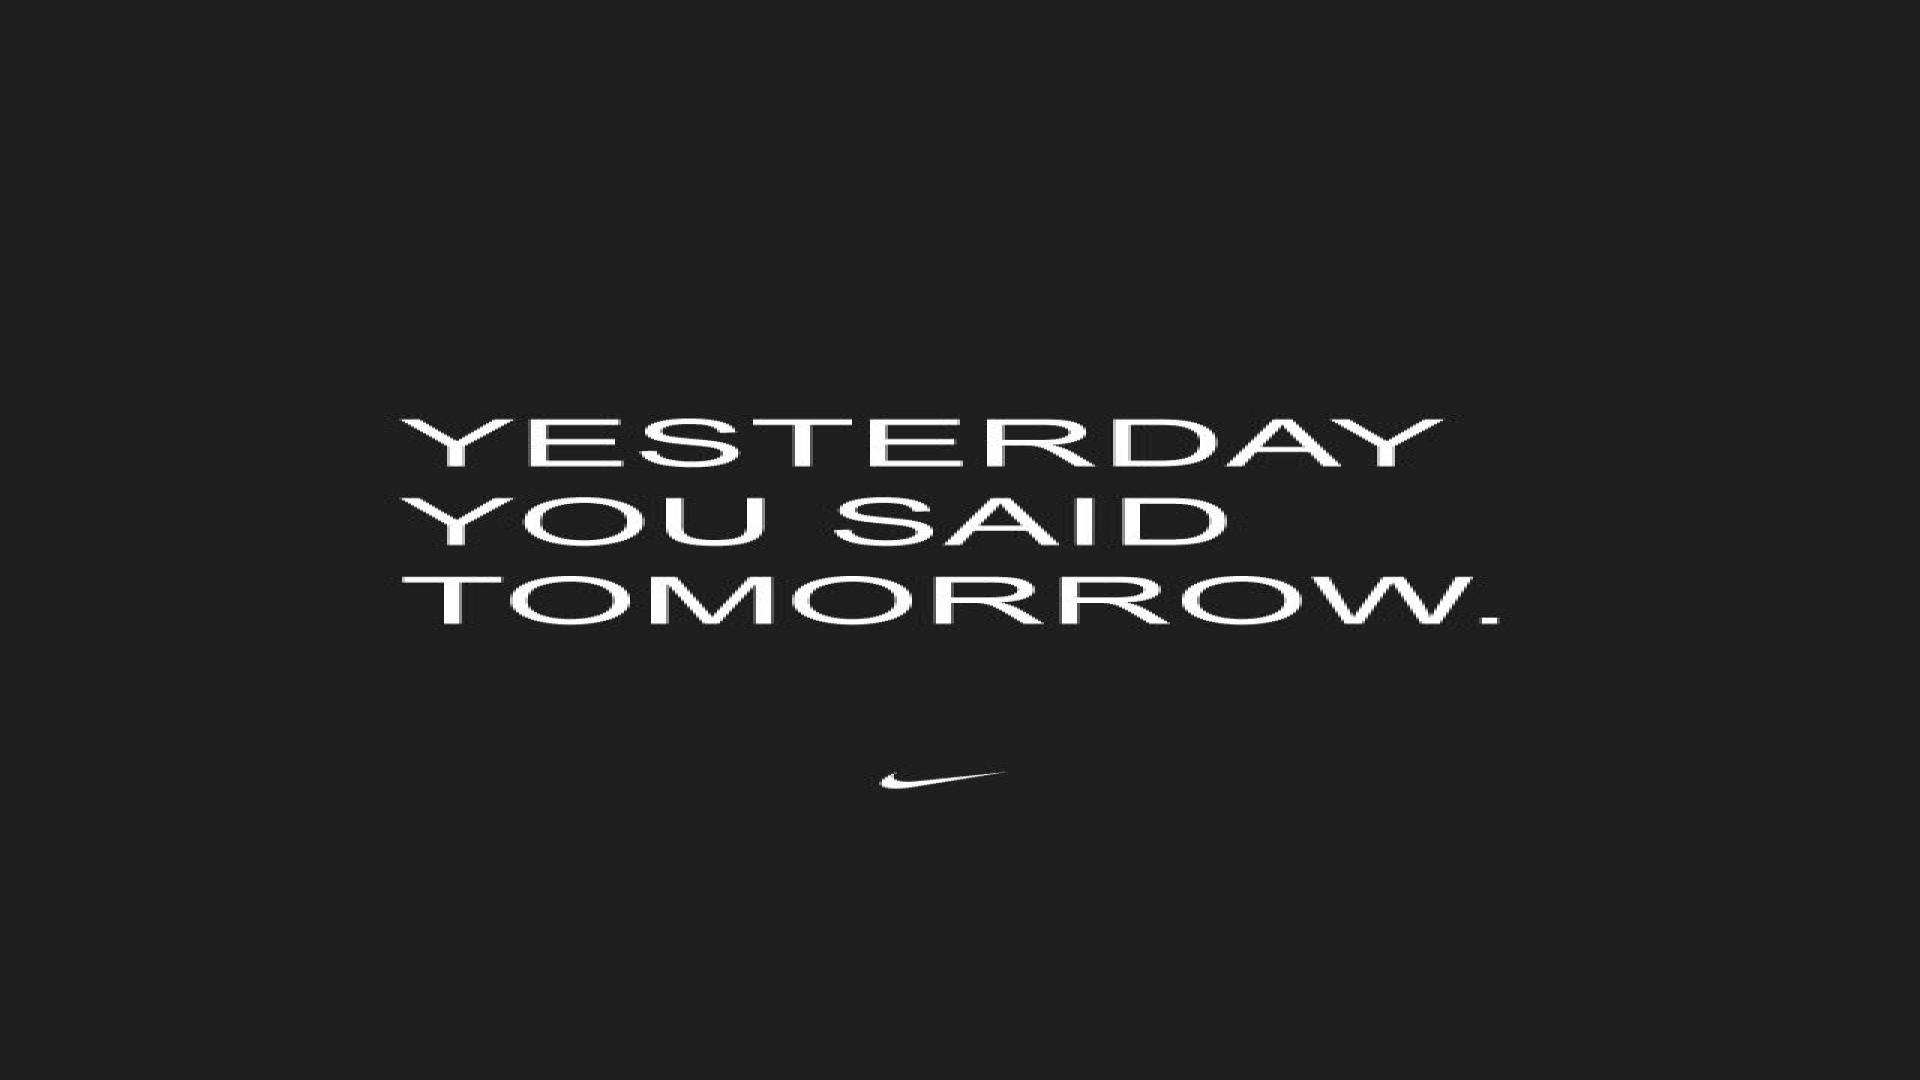 Nike Motivational Wallpapers - Top Free Nike Motivational Backgrounds ...